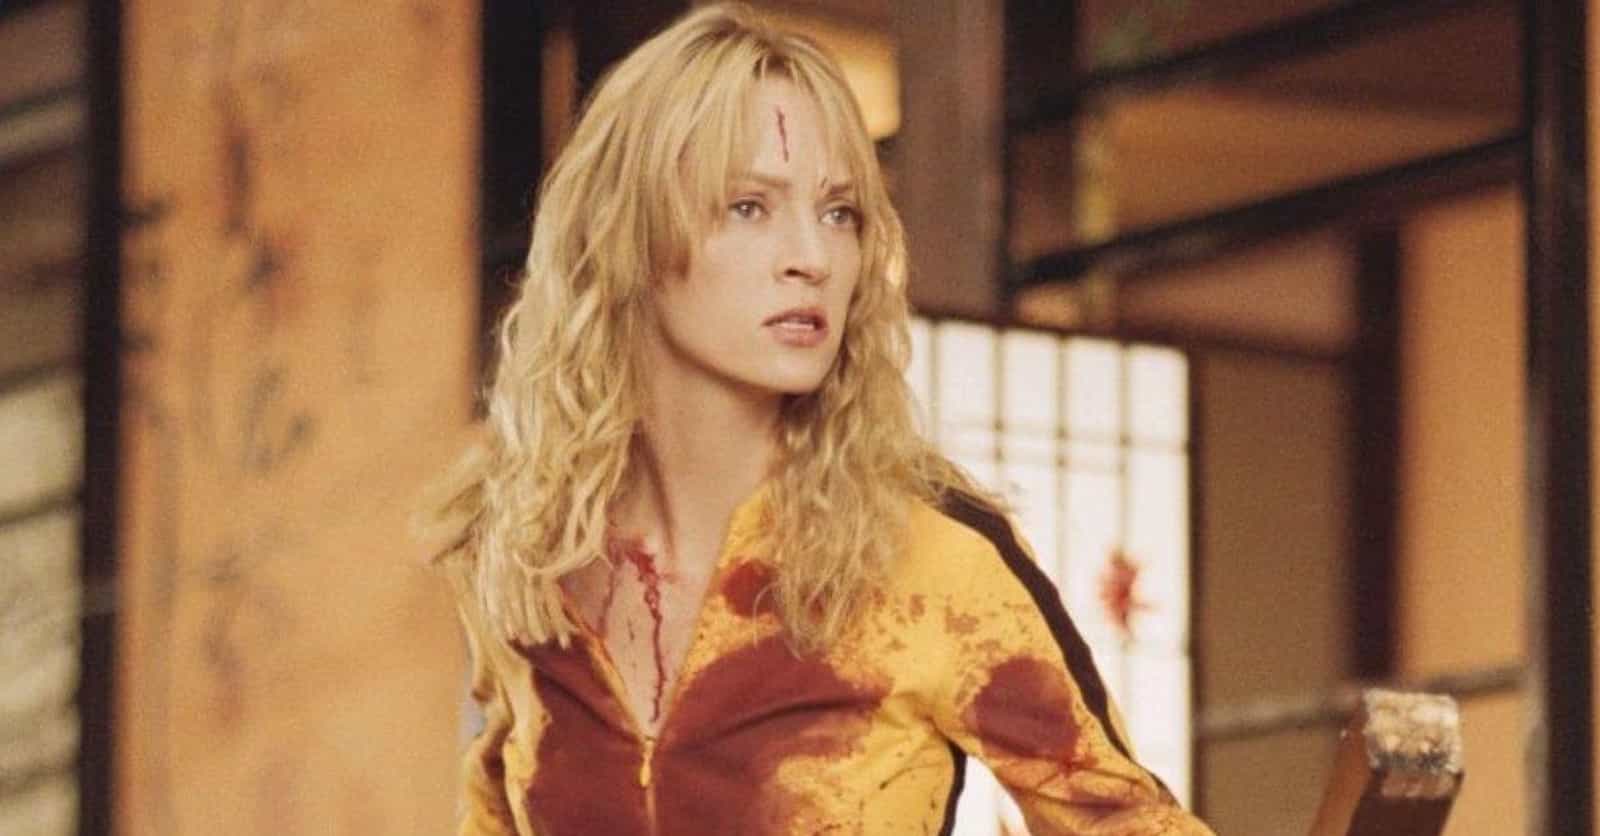 Behind-The-Scenes Stories From The Making Of 'Kill Bill'